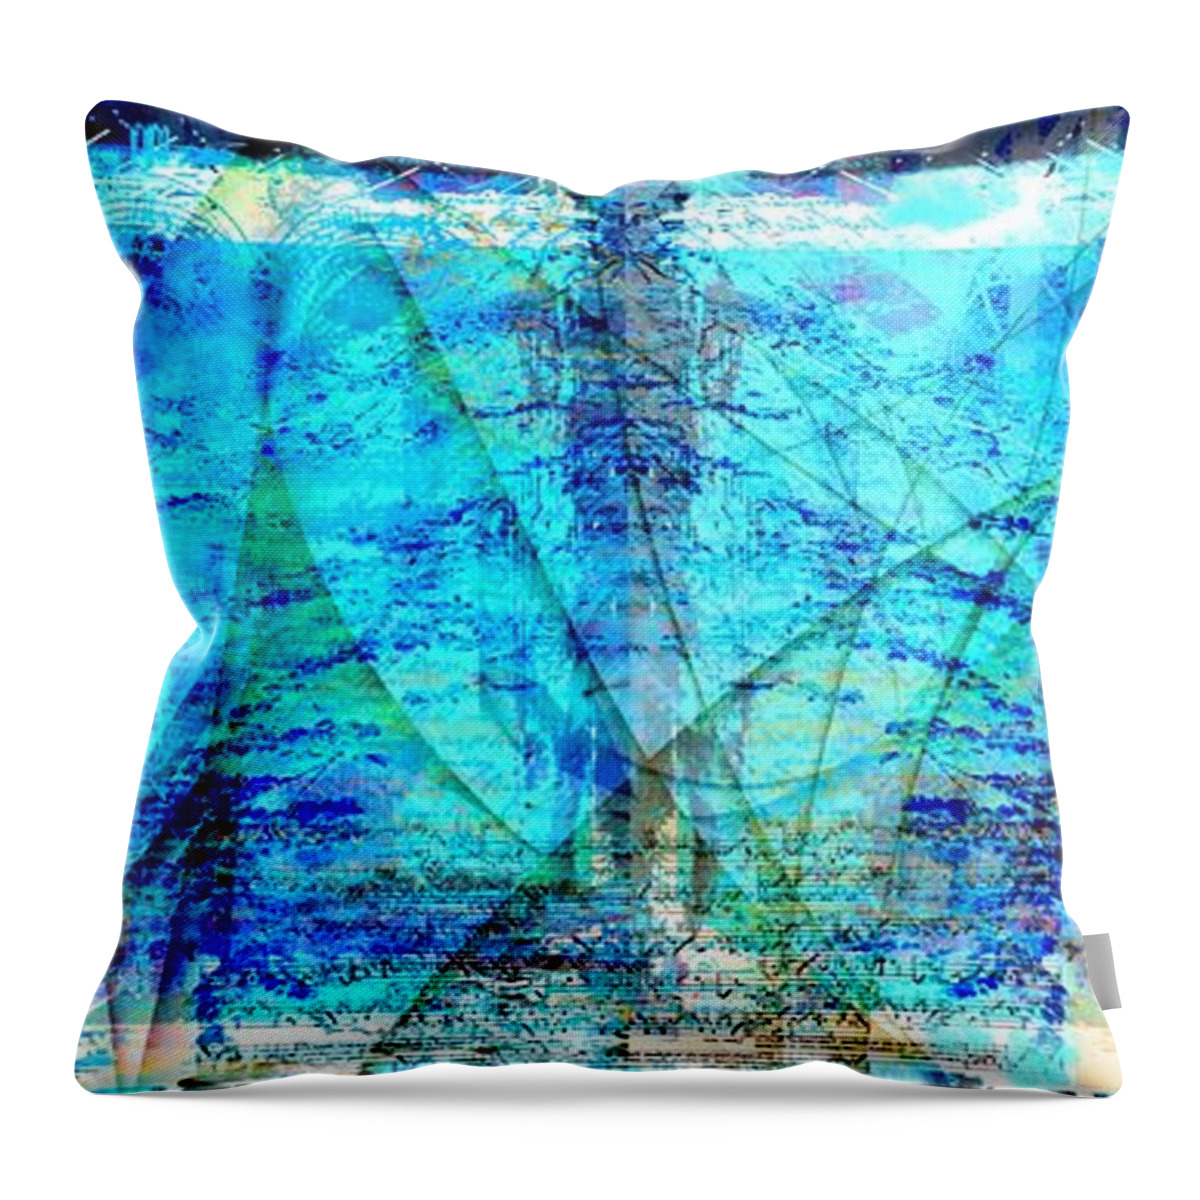 Abstract Throw Pillow featuring the digital art Symphonic Orchestra by Art Di